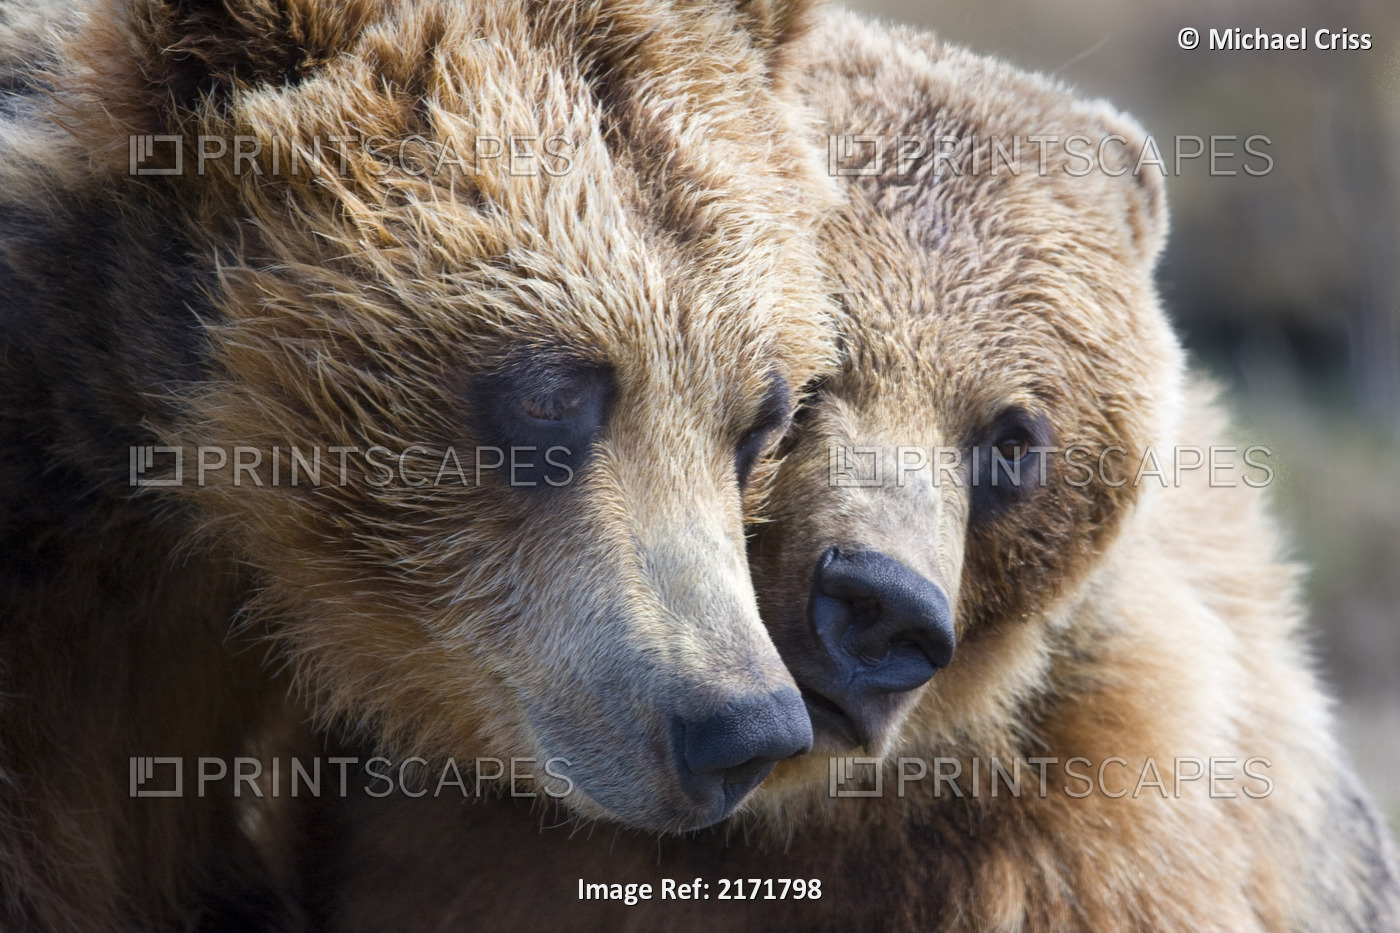 Captive Grizzly Bears Playing At The Alaska Wildlife Conservation Center, ...